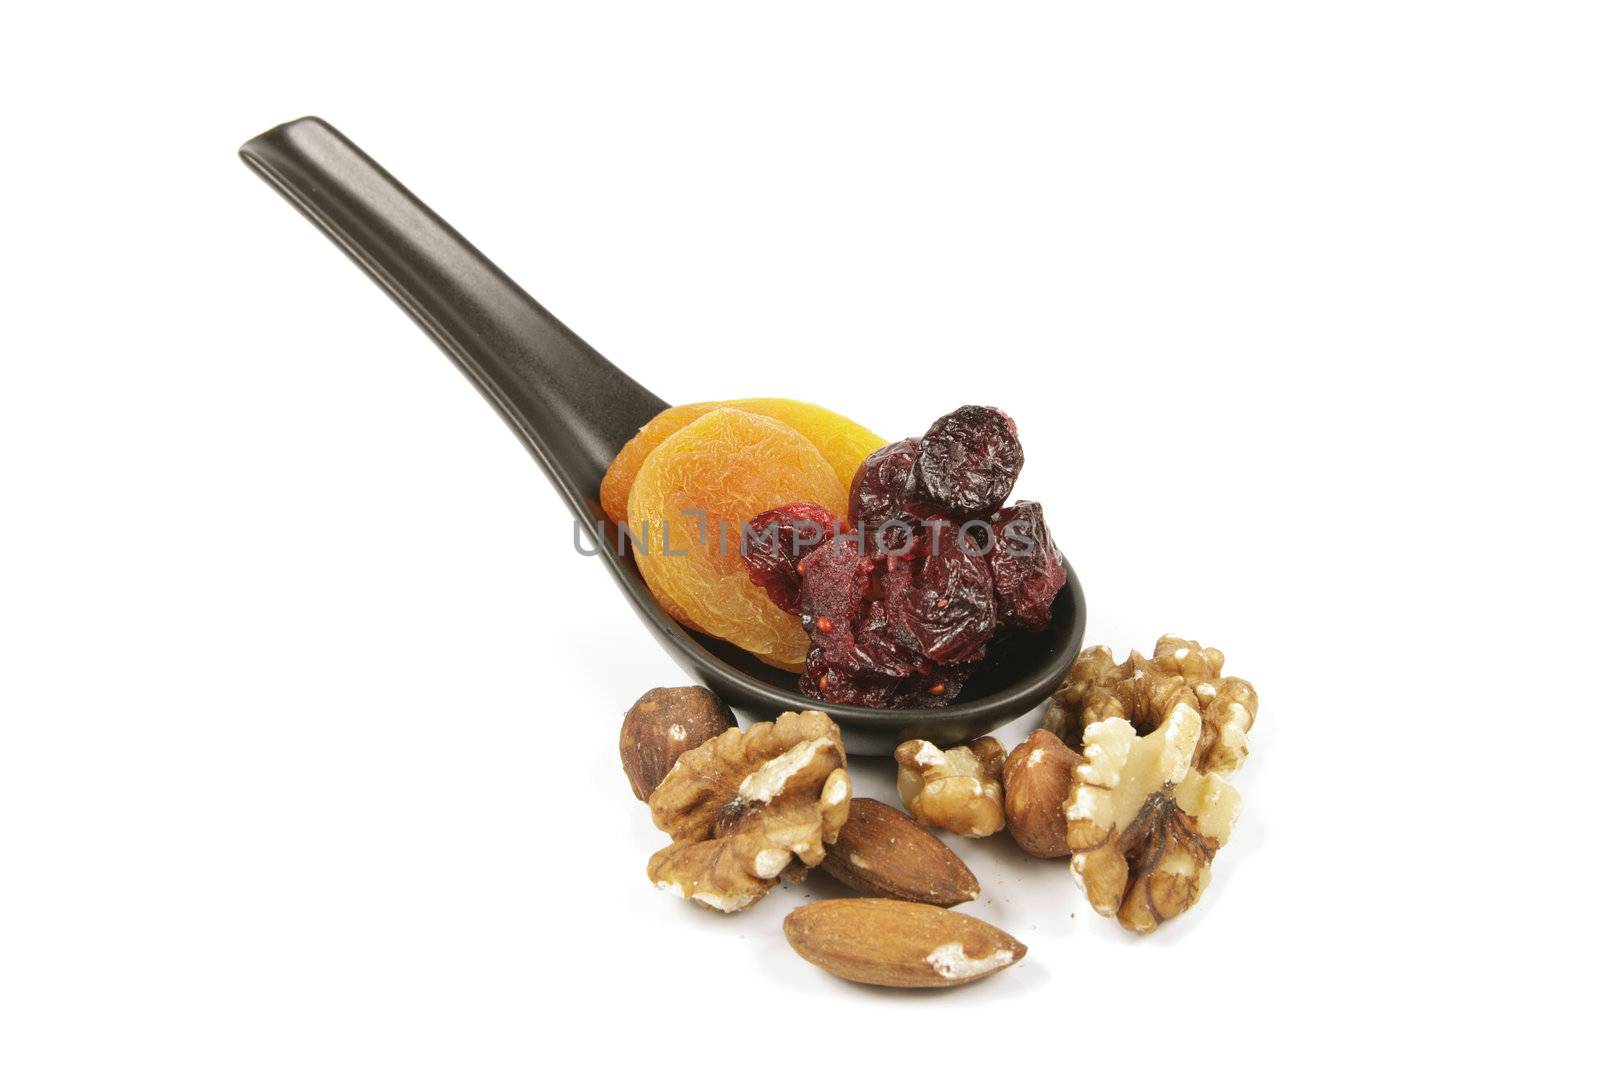 Cranberries and Apricots on a Spoon by KeithWilson